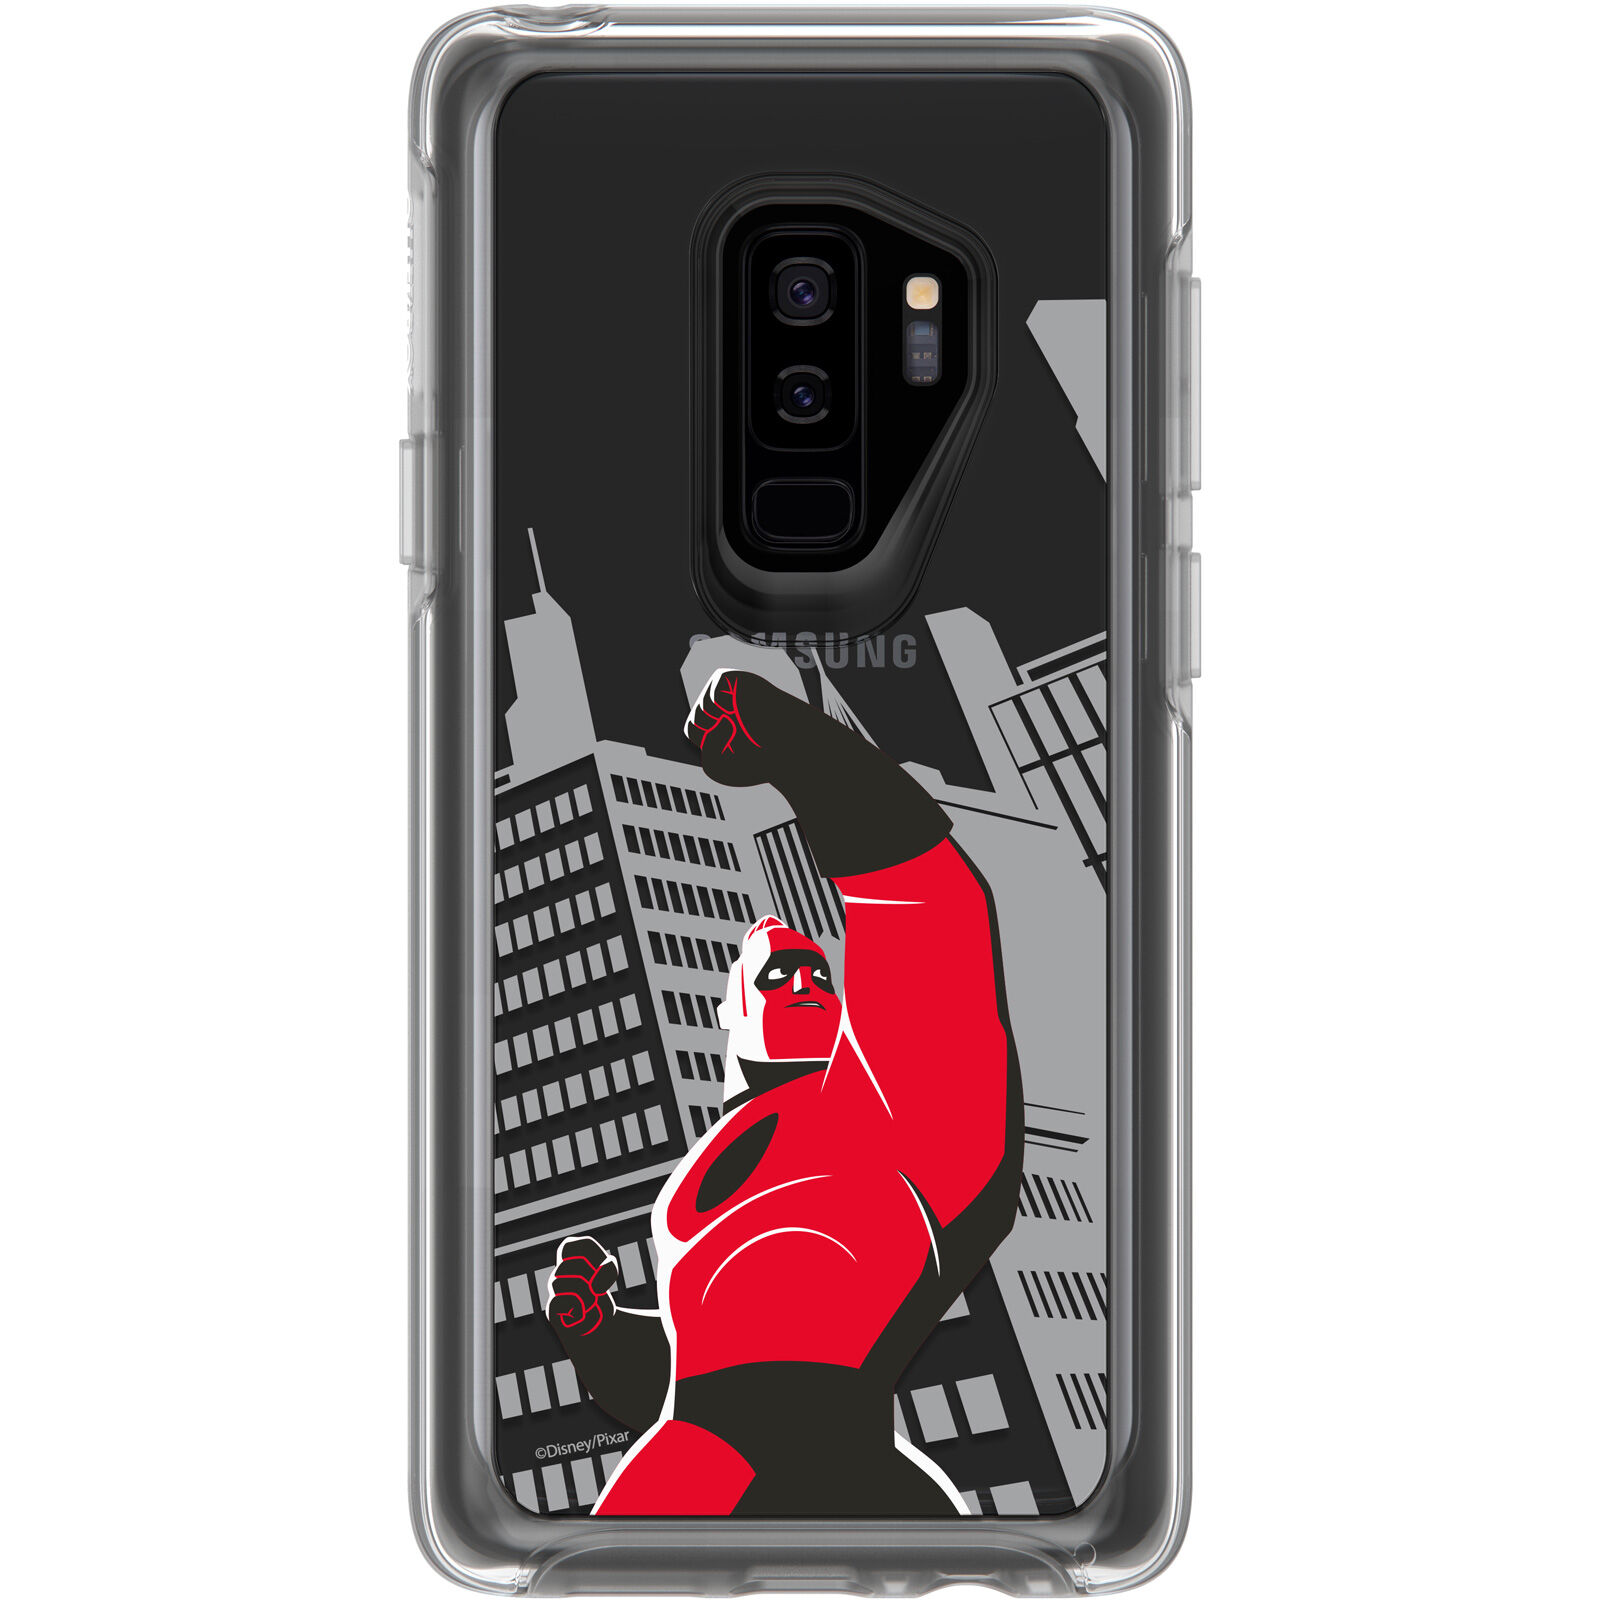 Galaxy S9+ cases from OtterBox